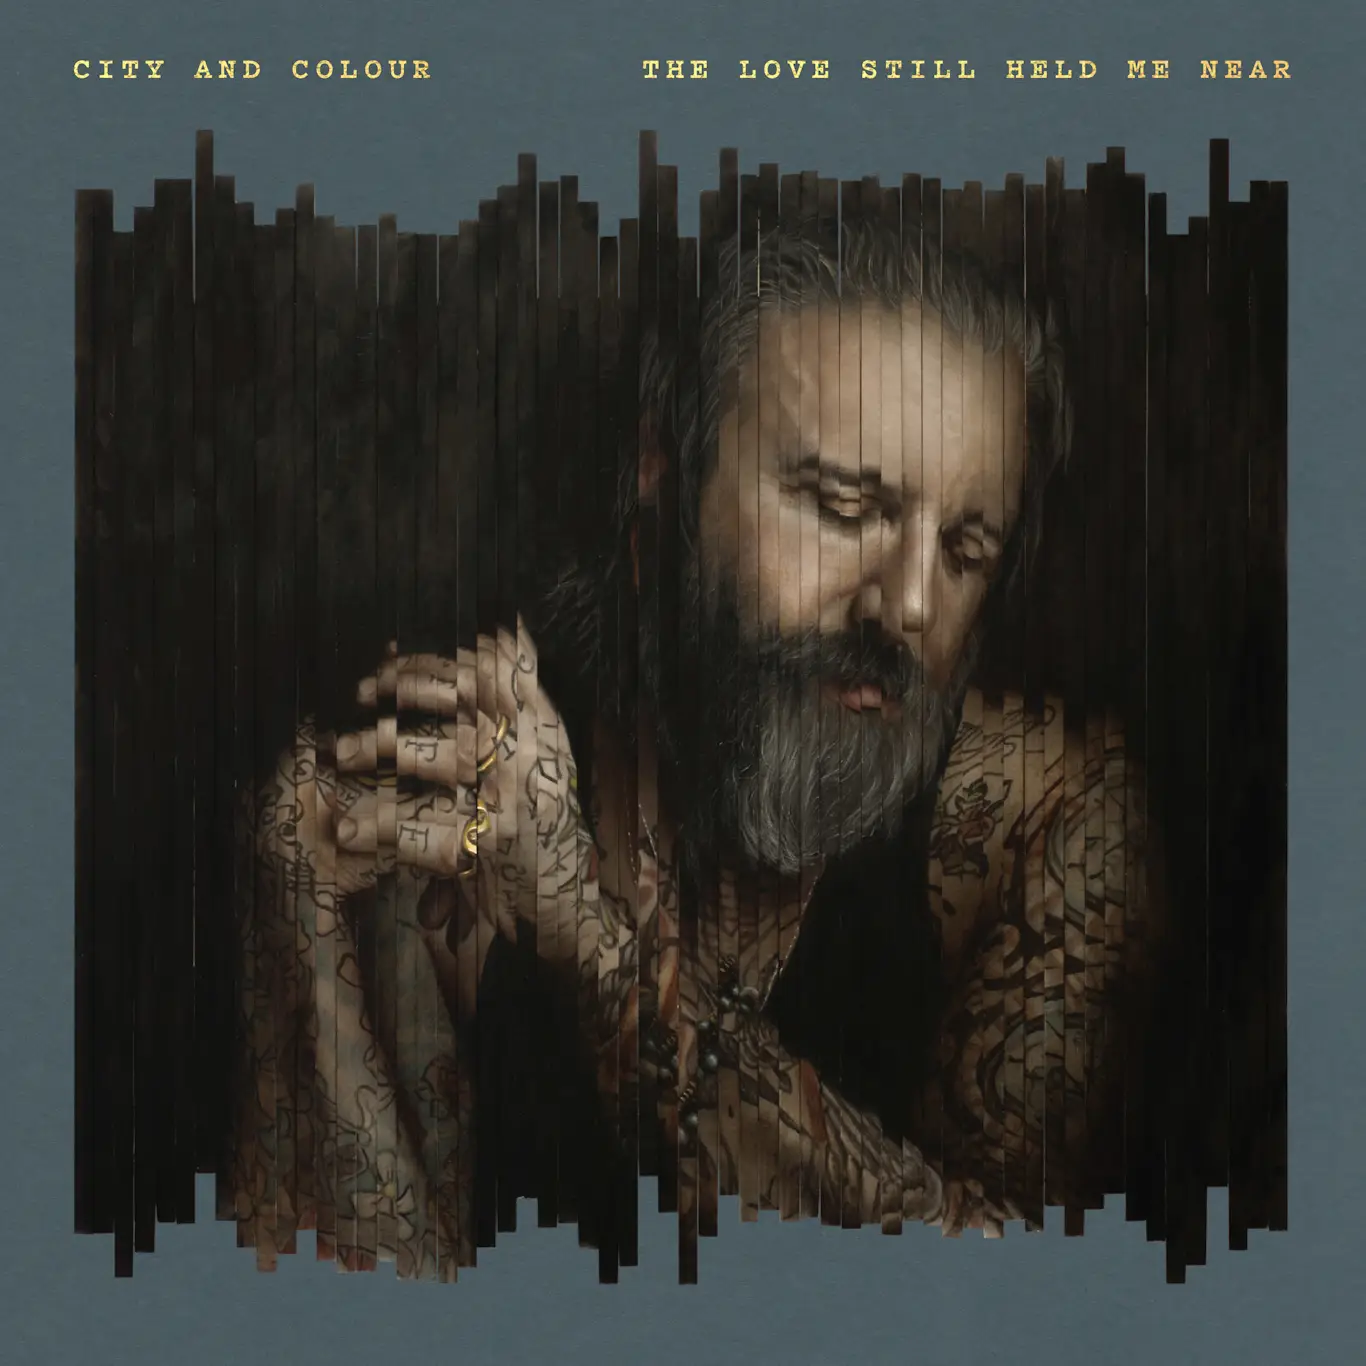 ALBUM REVIEW: City and Colour – The Love Still Held Me Near